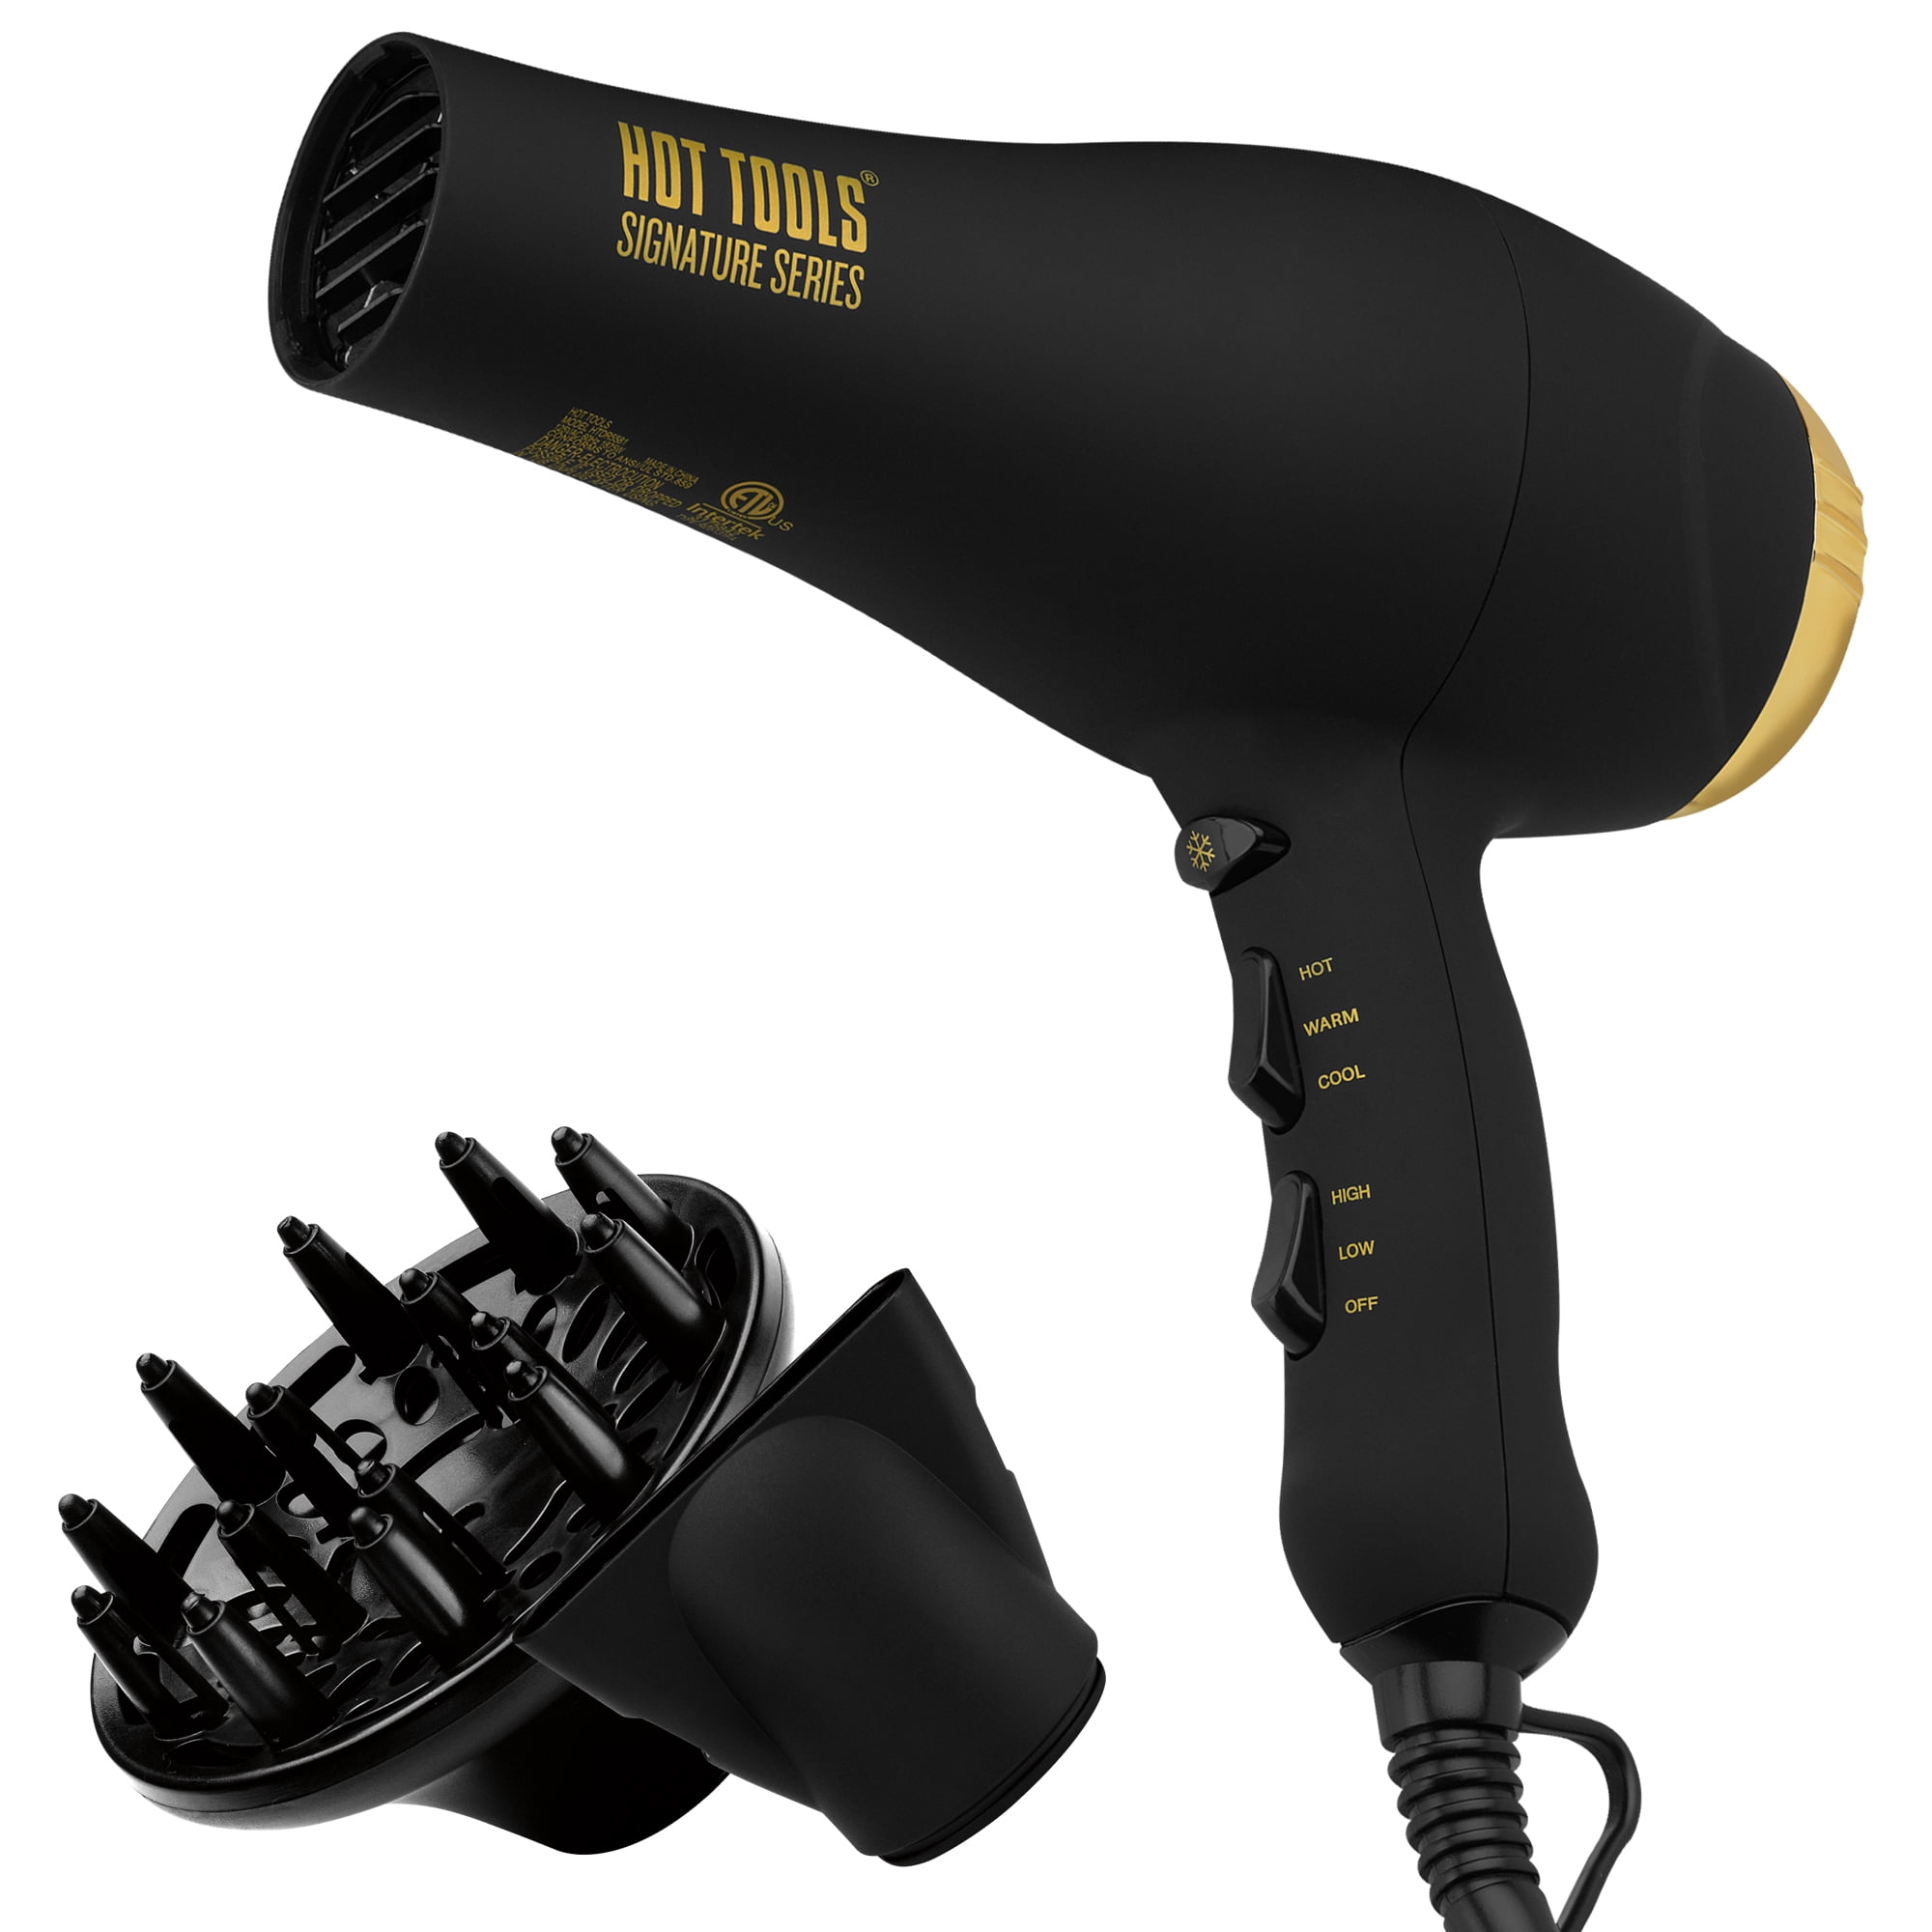 How to choose the best hair dryer for your hair